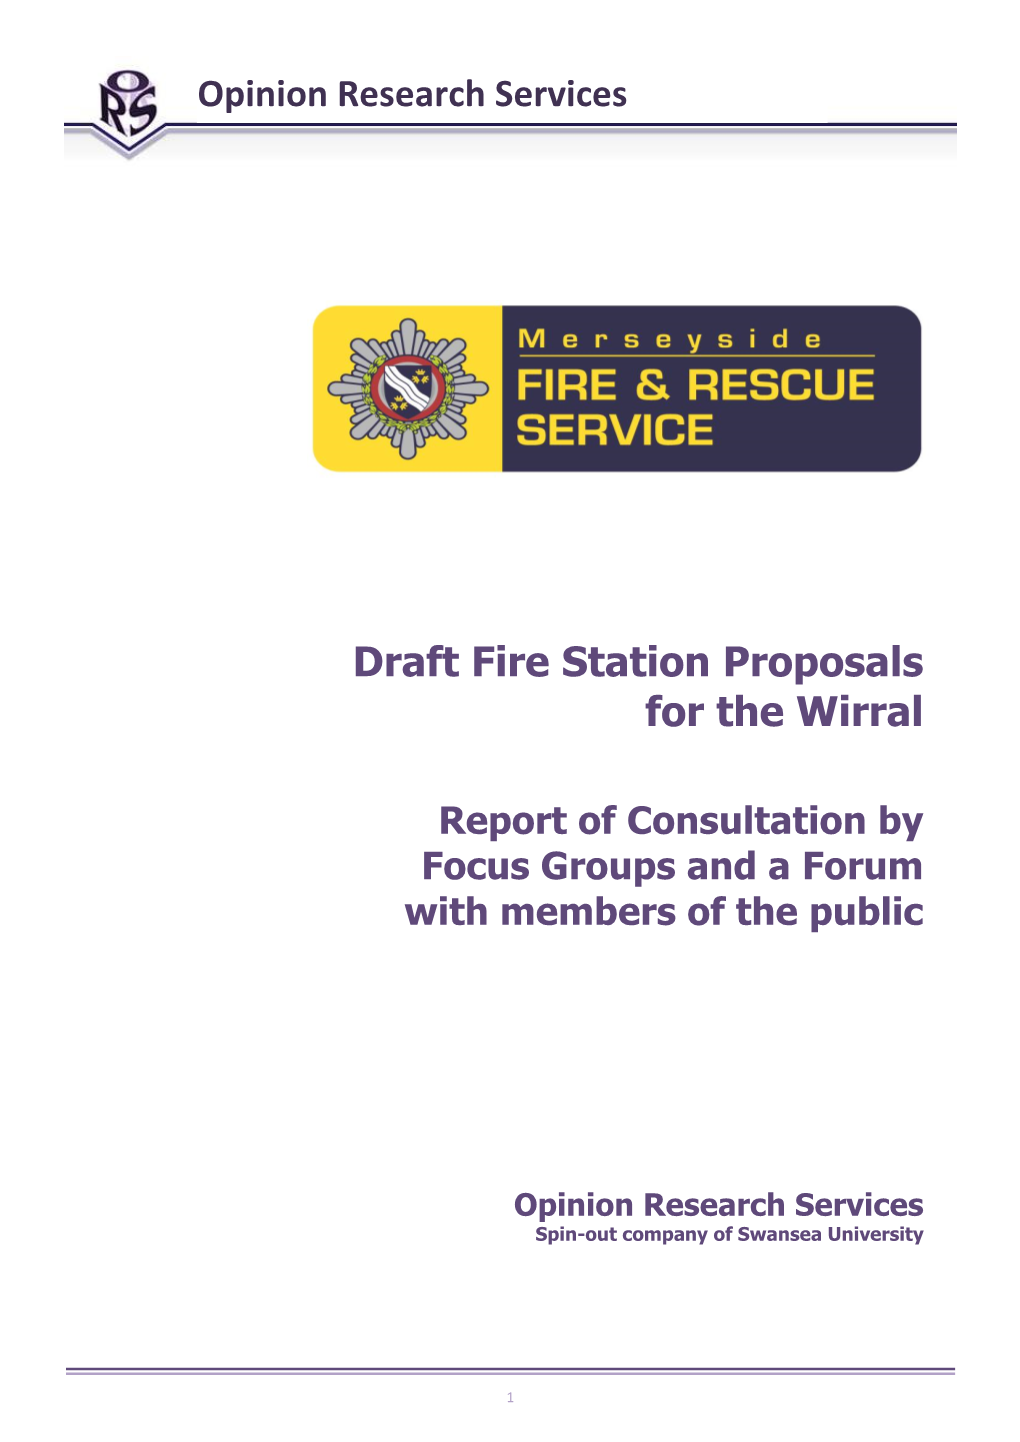 Wirral Fire Stations Report: Merseyside Fire and Rescue Authority January 2015 Opinion Research Services